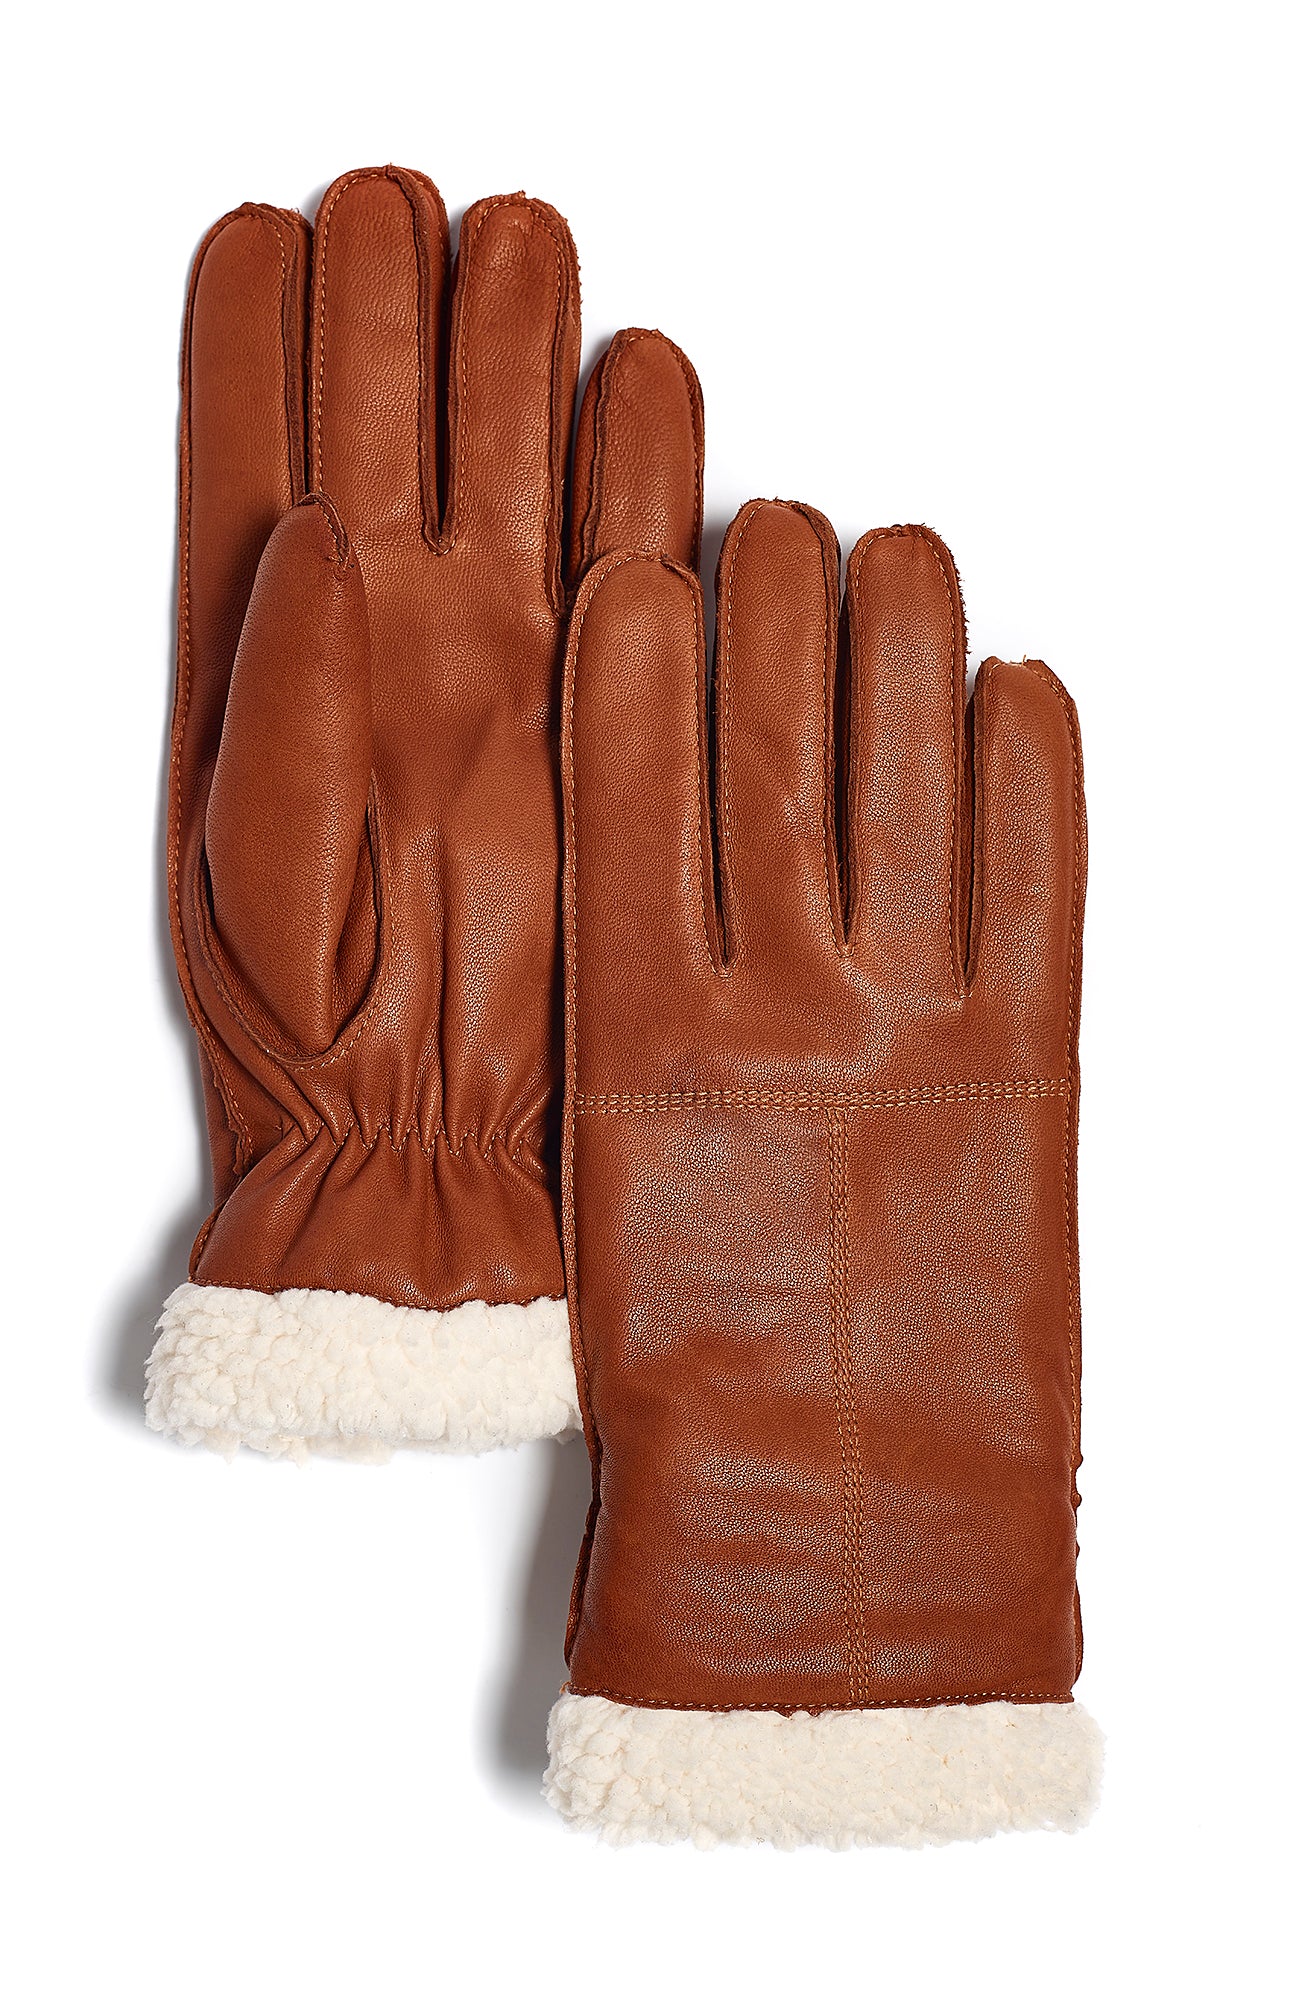 The Colwood Glove